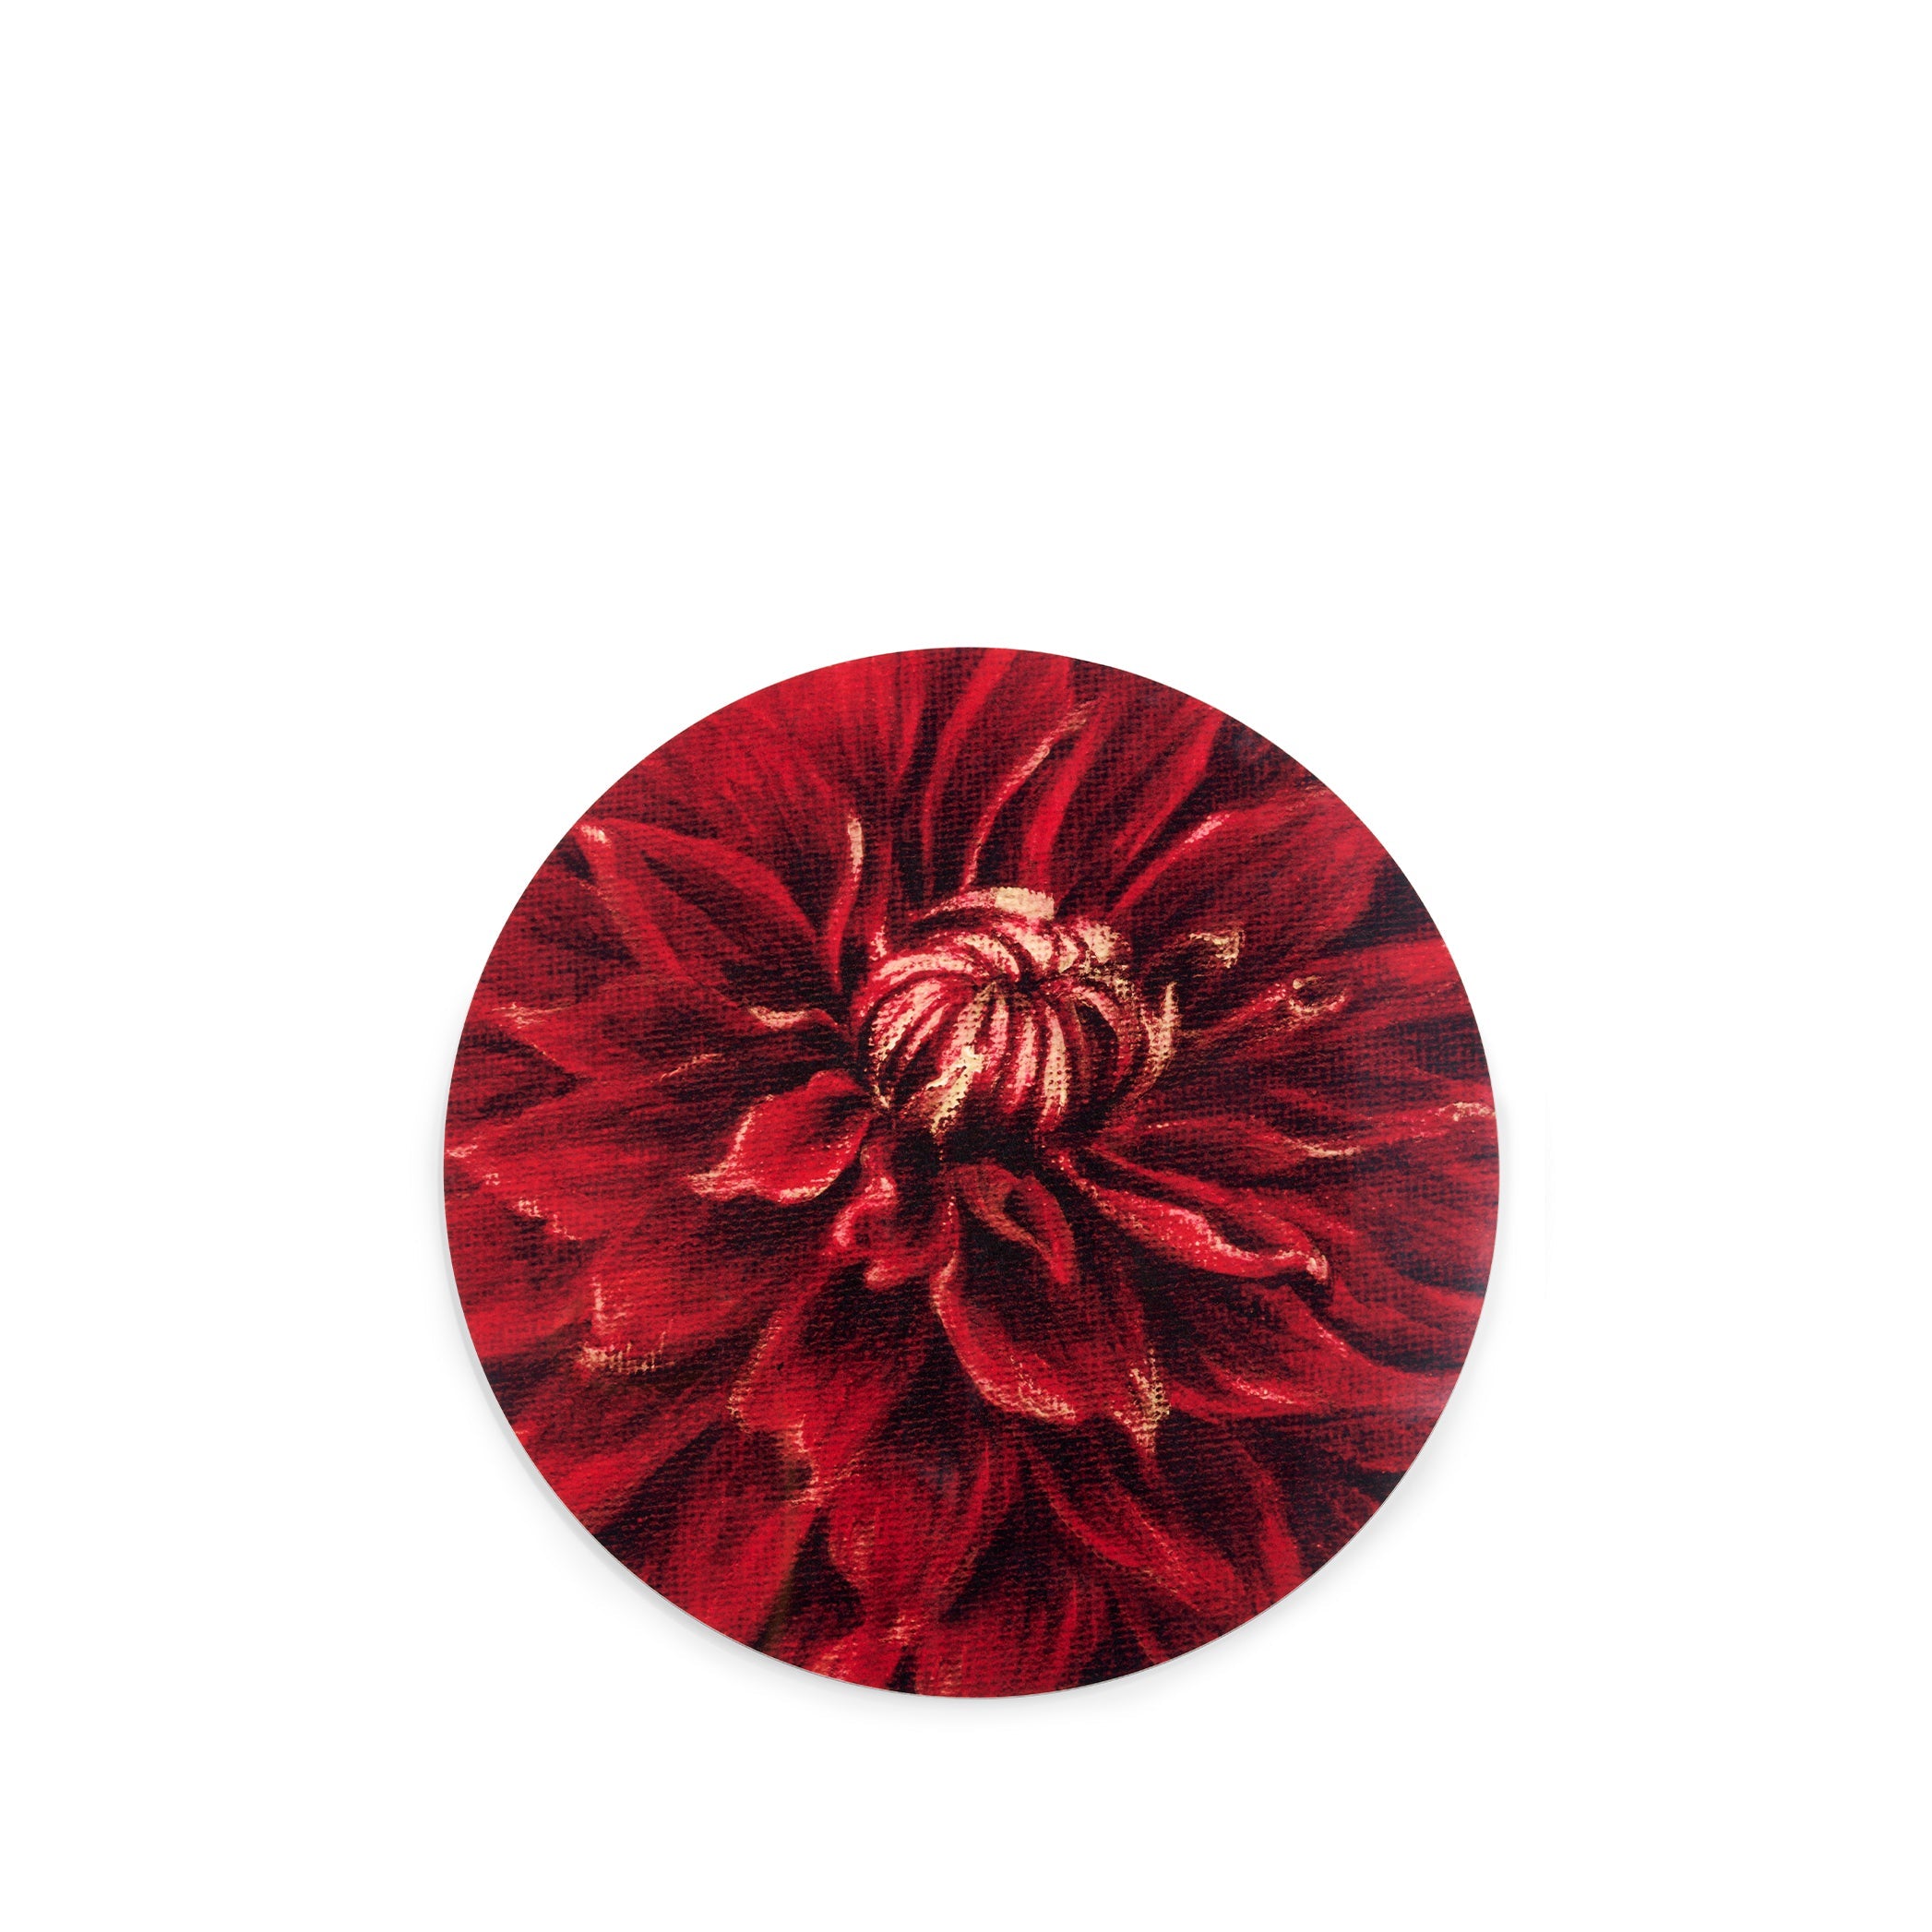 Dahlia 'Nuit d’Ete' Round Cork-Backed Placemat in Claret Red